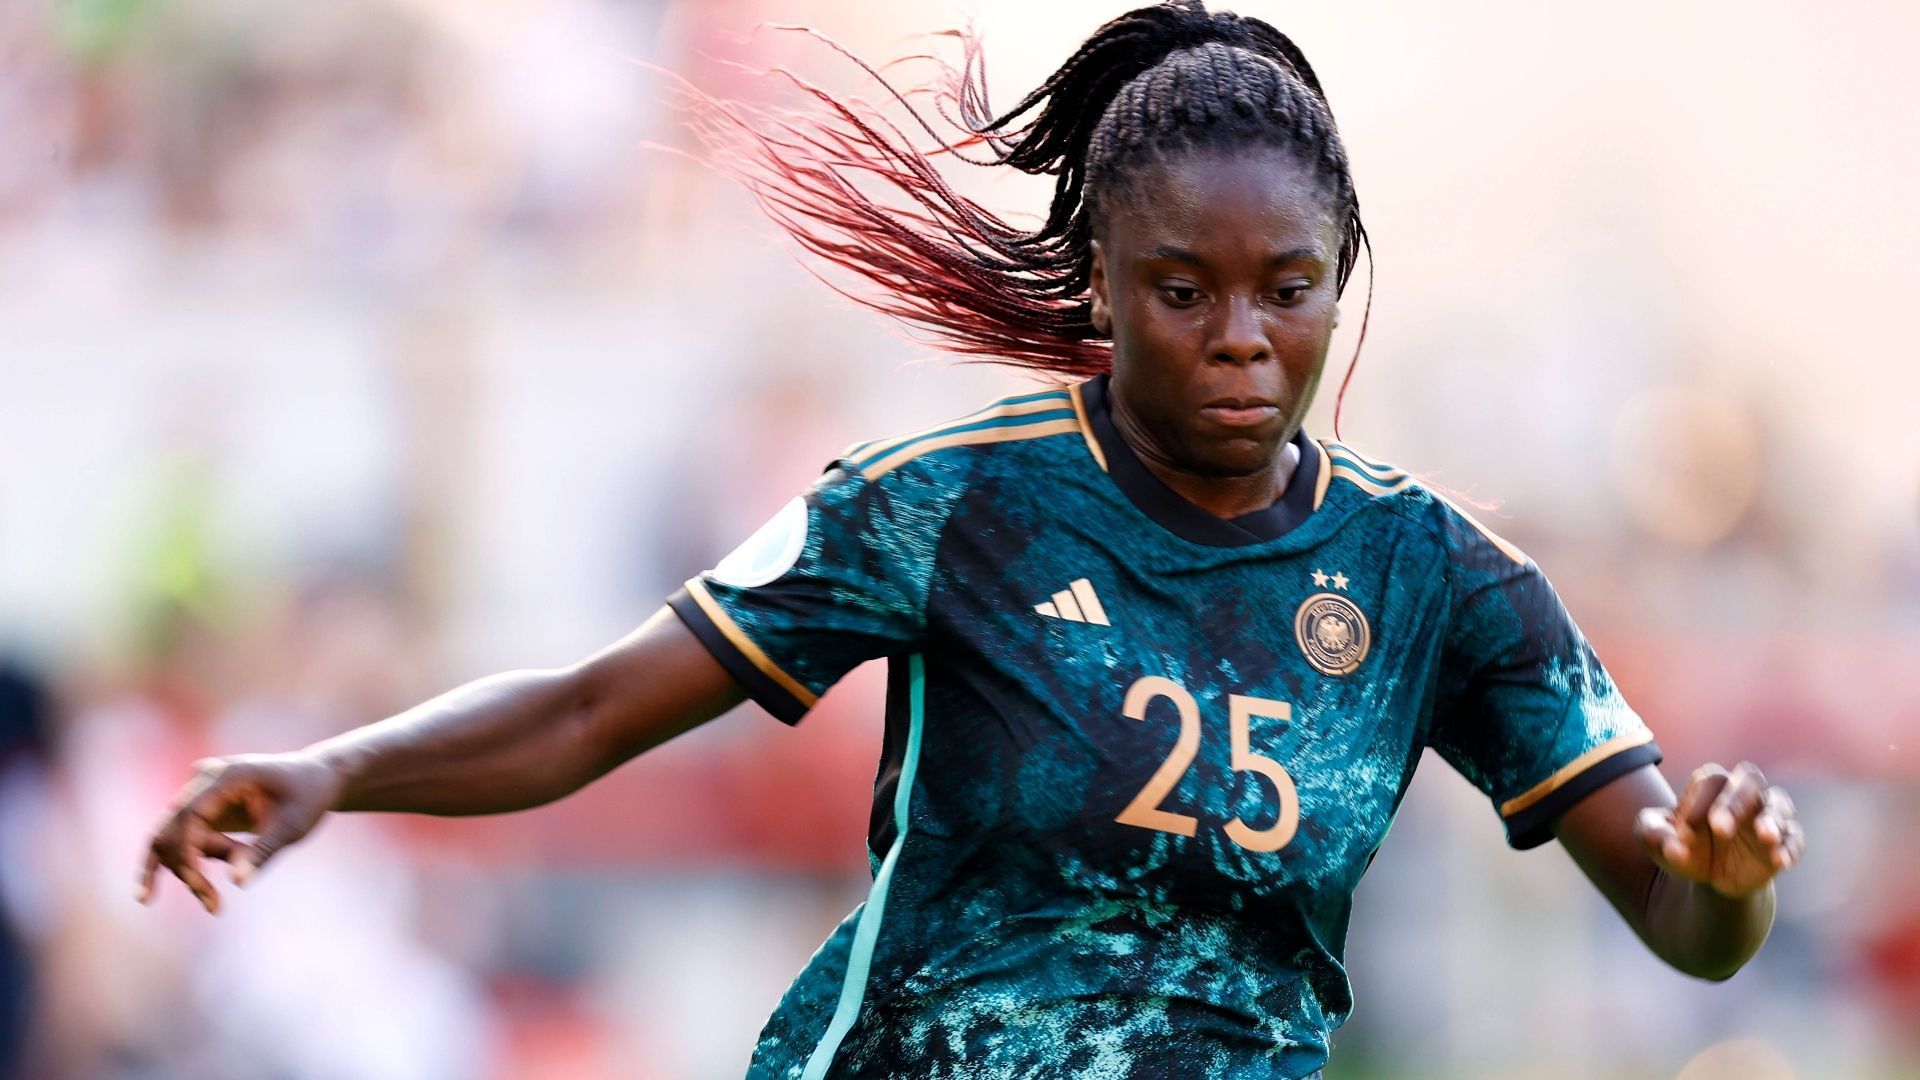 
                <strong>Nicole Anyomi</strong><br>
                &#x2022; <strong>Position: </strong>Mittelfeld/Angriff<br>&#x2022; <strong>Verein: </strong>Eintracht Frankfurt<br>&#x2022; <strong>Trikotnummer: </strong><br>&#x2022; <strong>Alter: </strong><br>&#x2022; <strong>Länderspiele: </strong><br>&#x2022; <strong>Länderspiel-Tore: </strong><br>
              